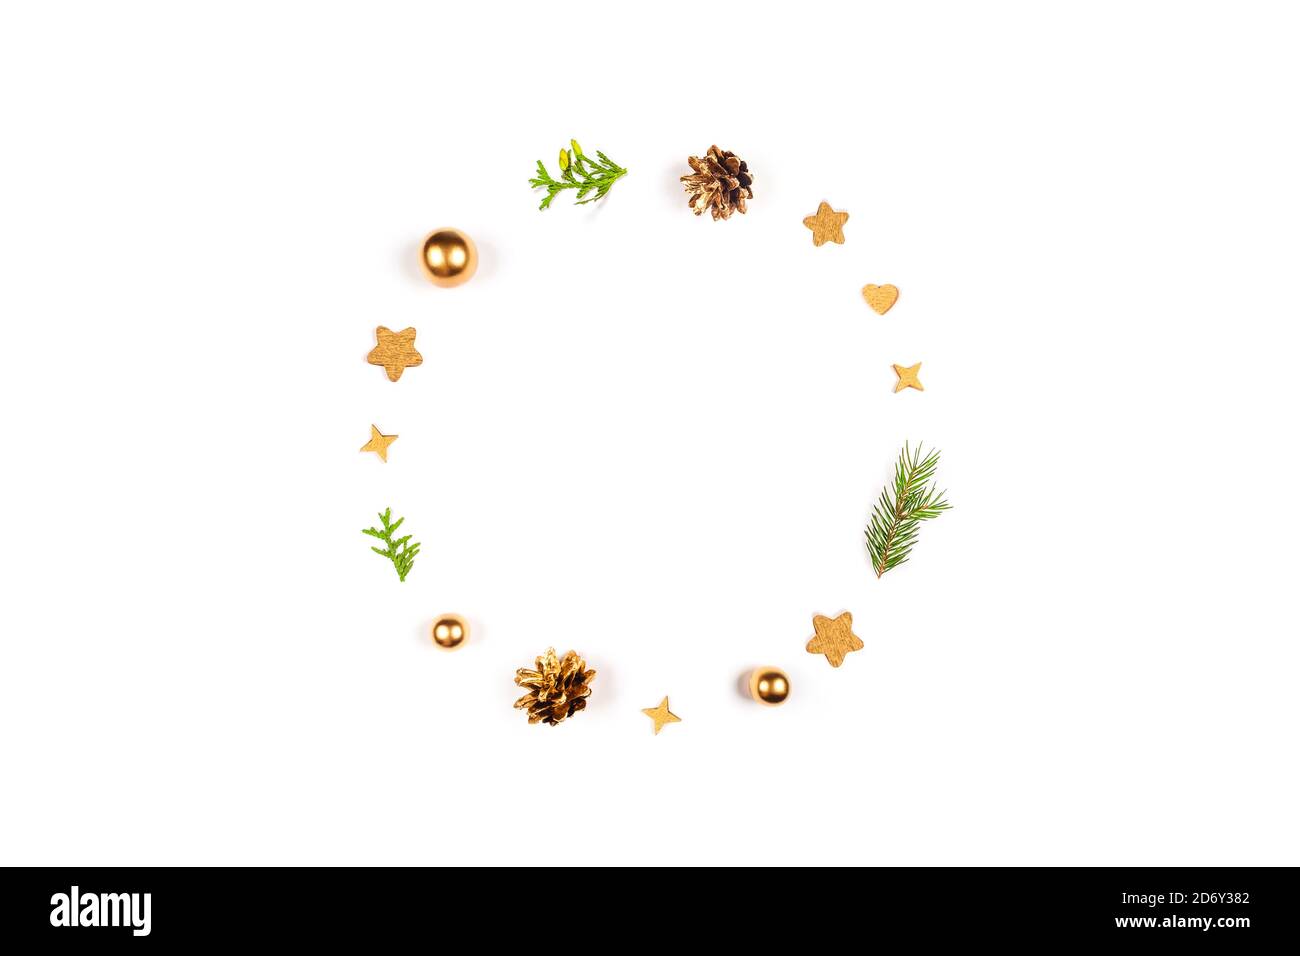 Christmas decorations are laid out in the shape of a circle on a white isolated background. Stock Photo